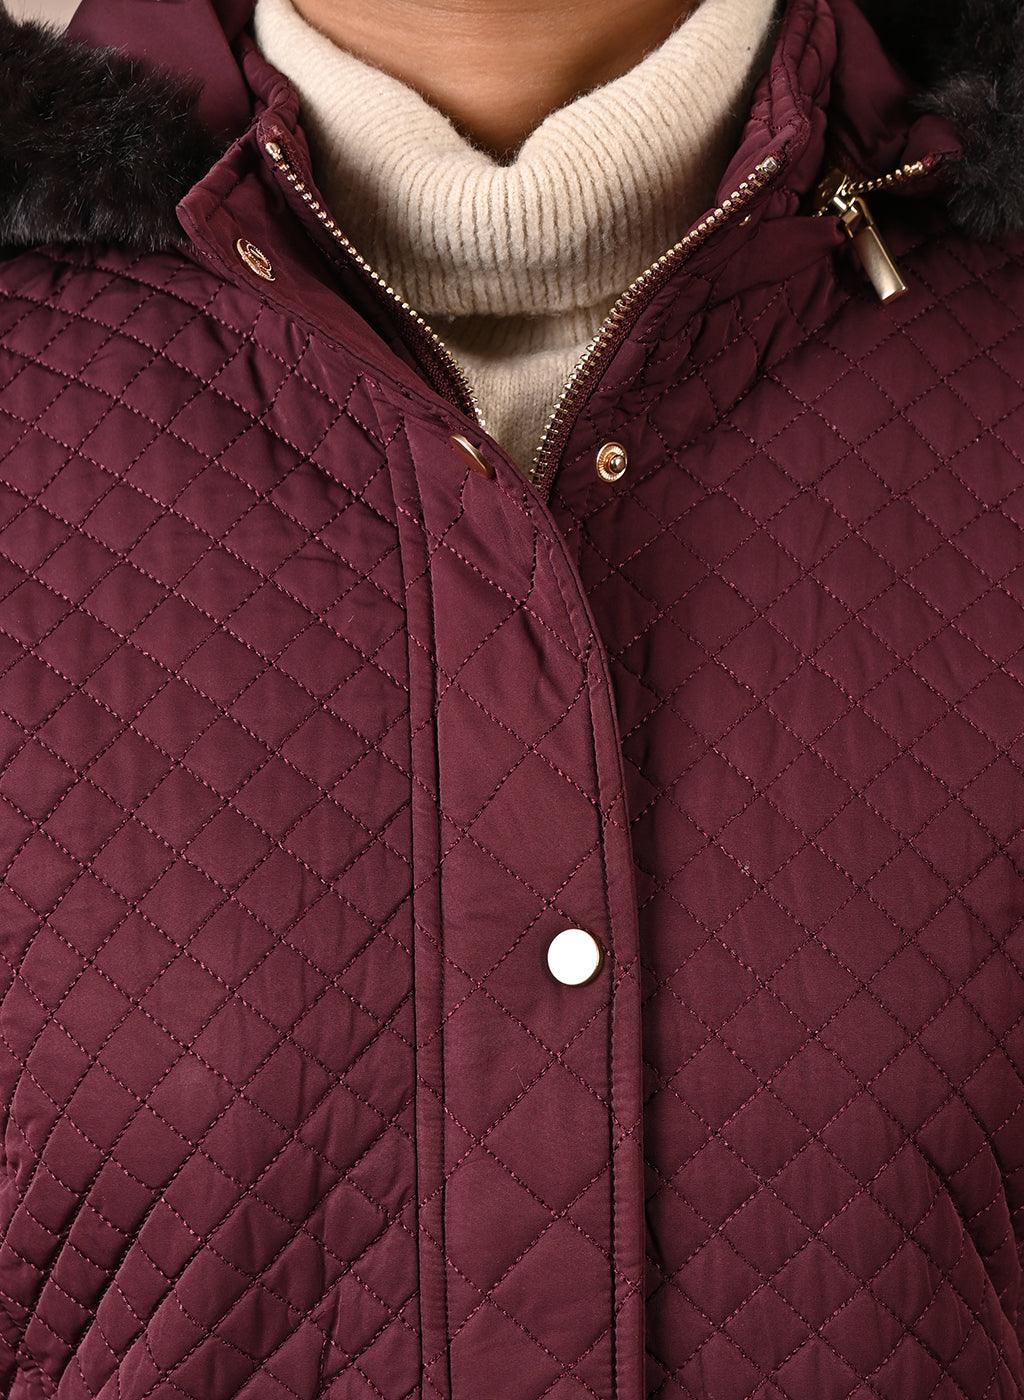 Maroon Quilted Jacket with attached Hood - Lakshita